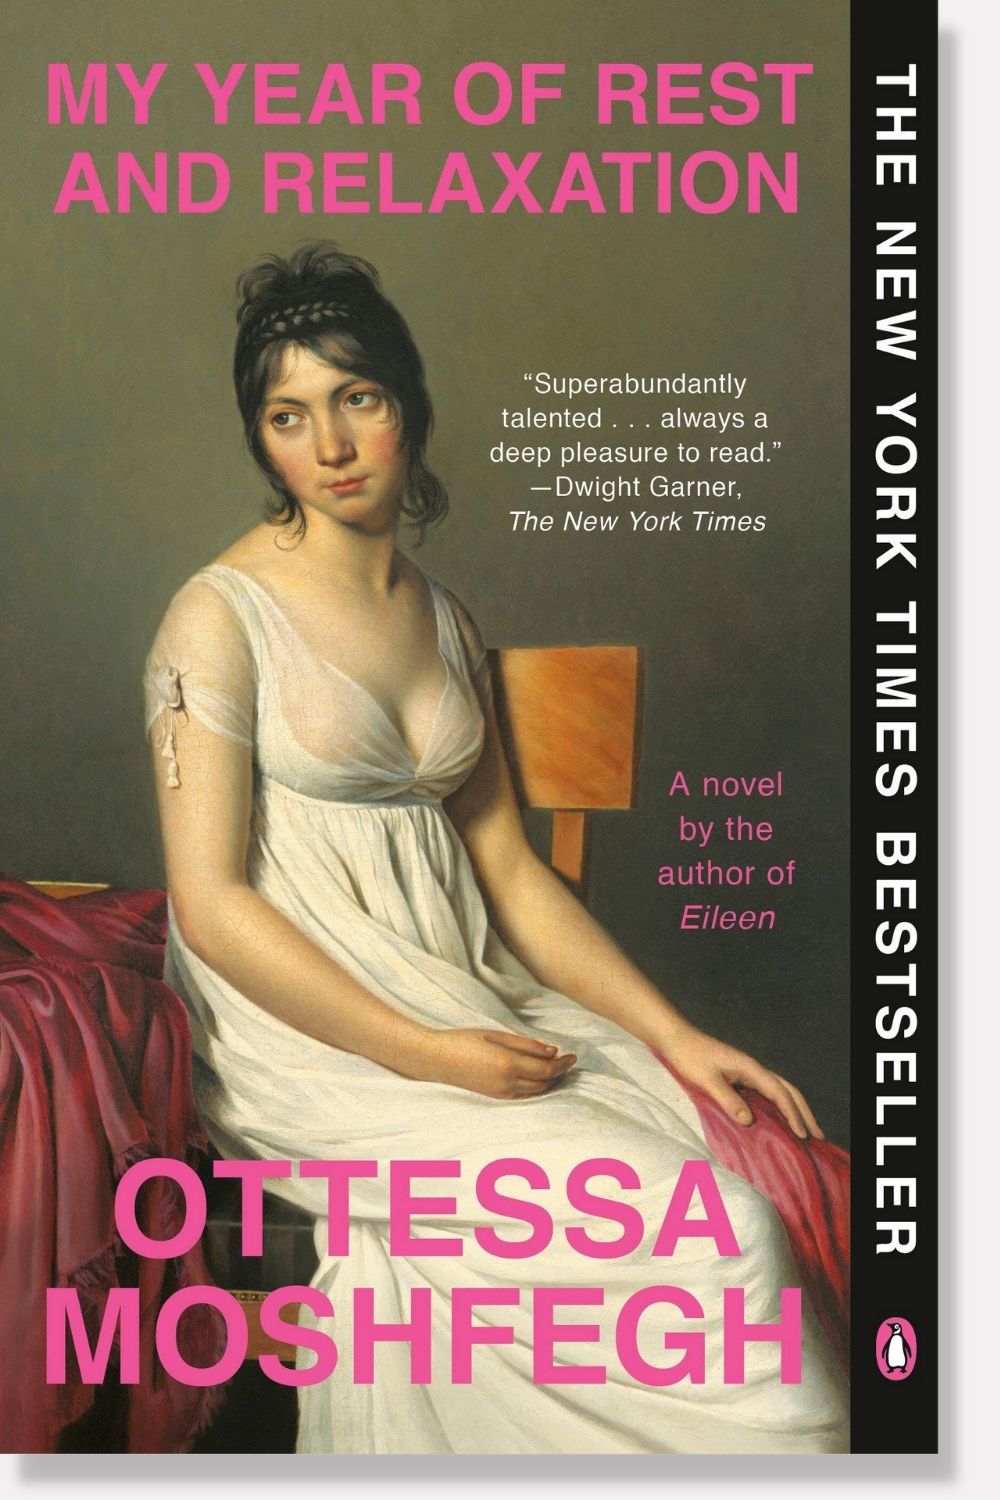 My Year of Rest and Relaxation by Ottessa Moshfegh - book cover